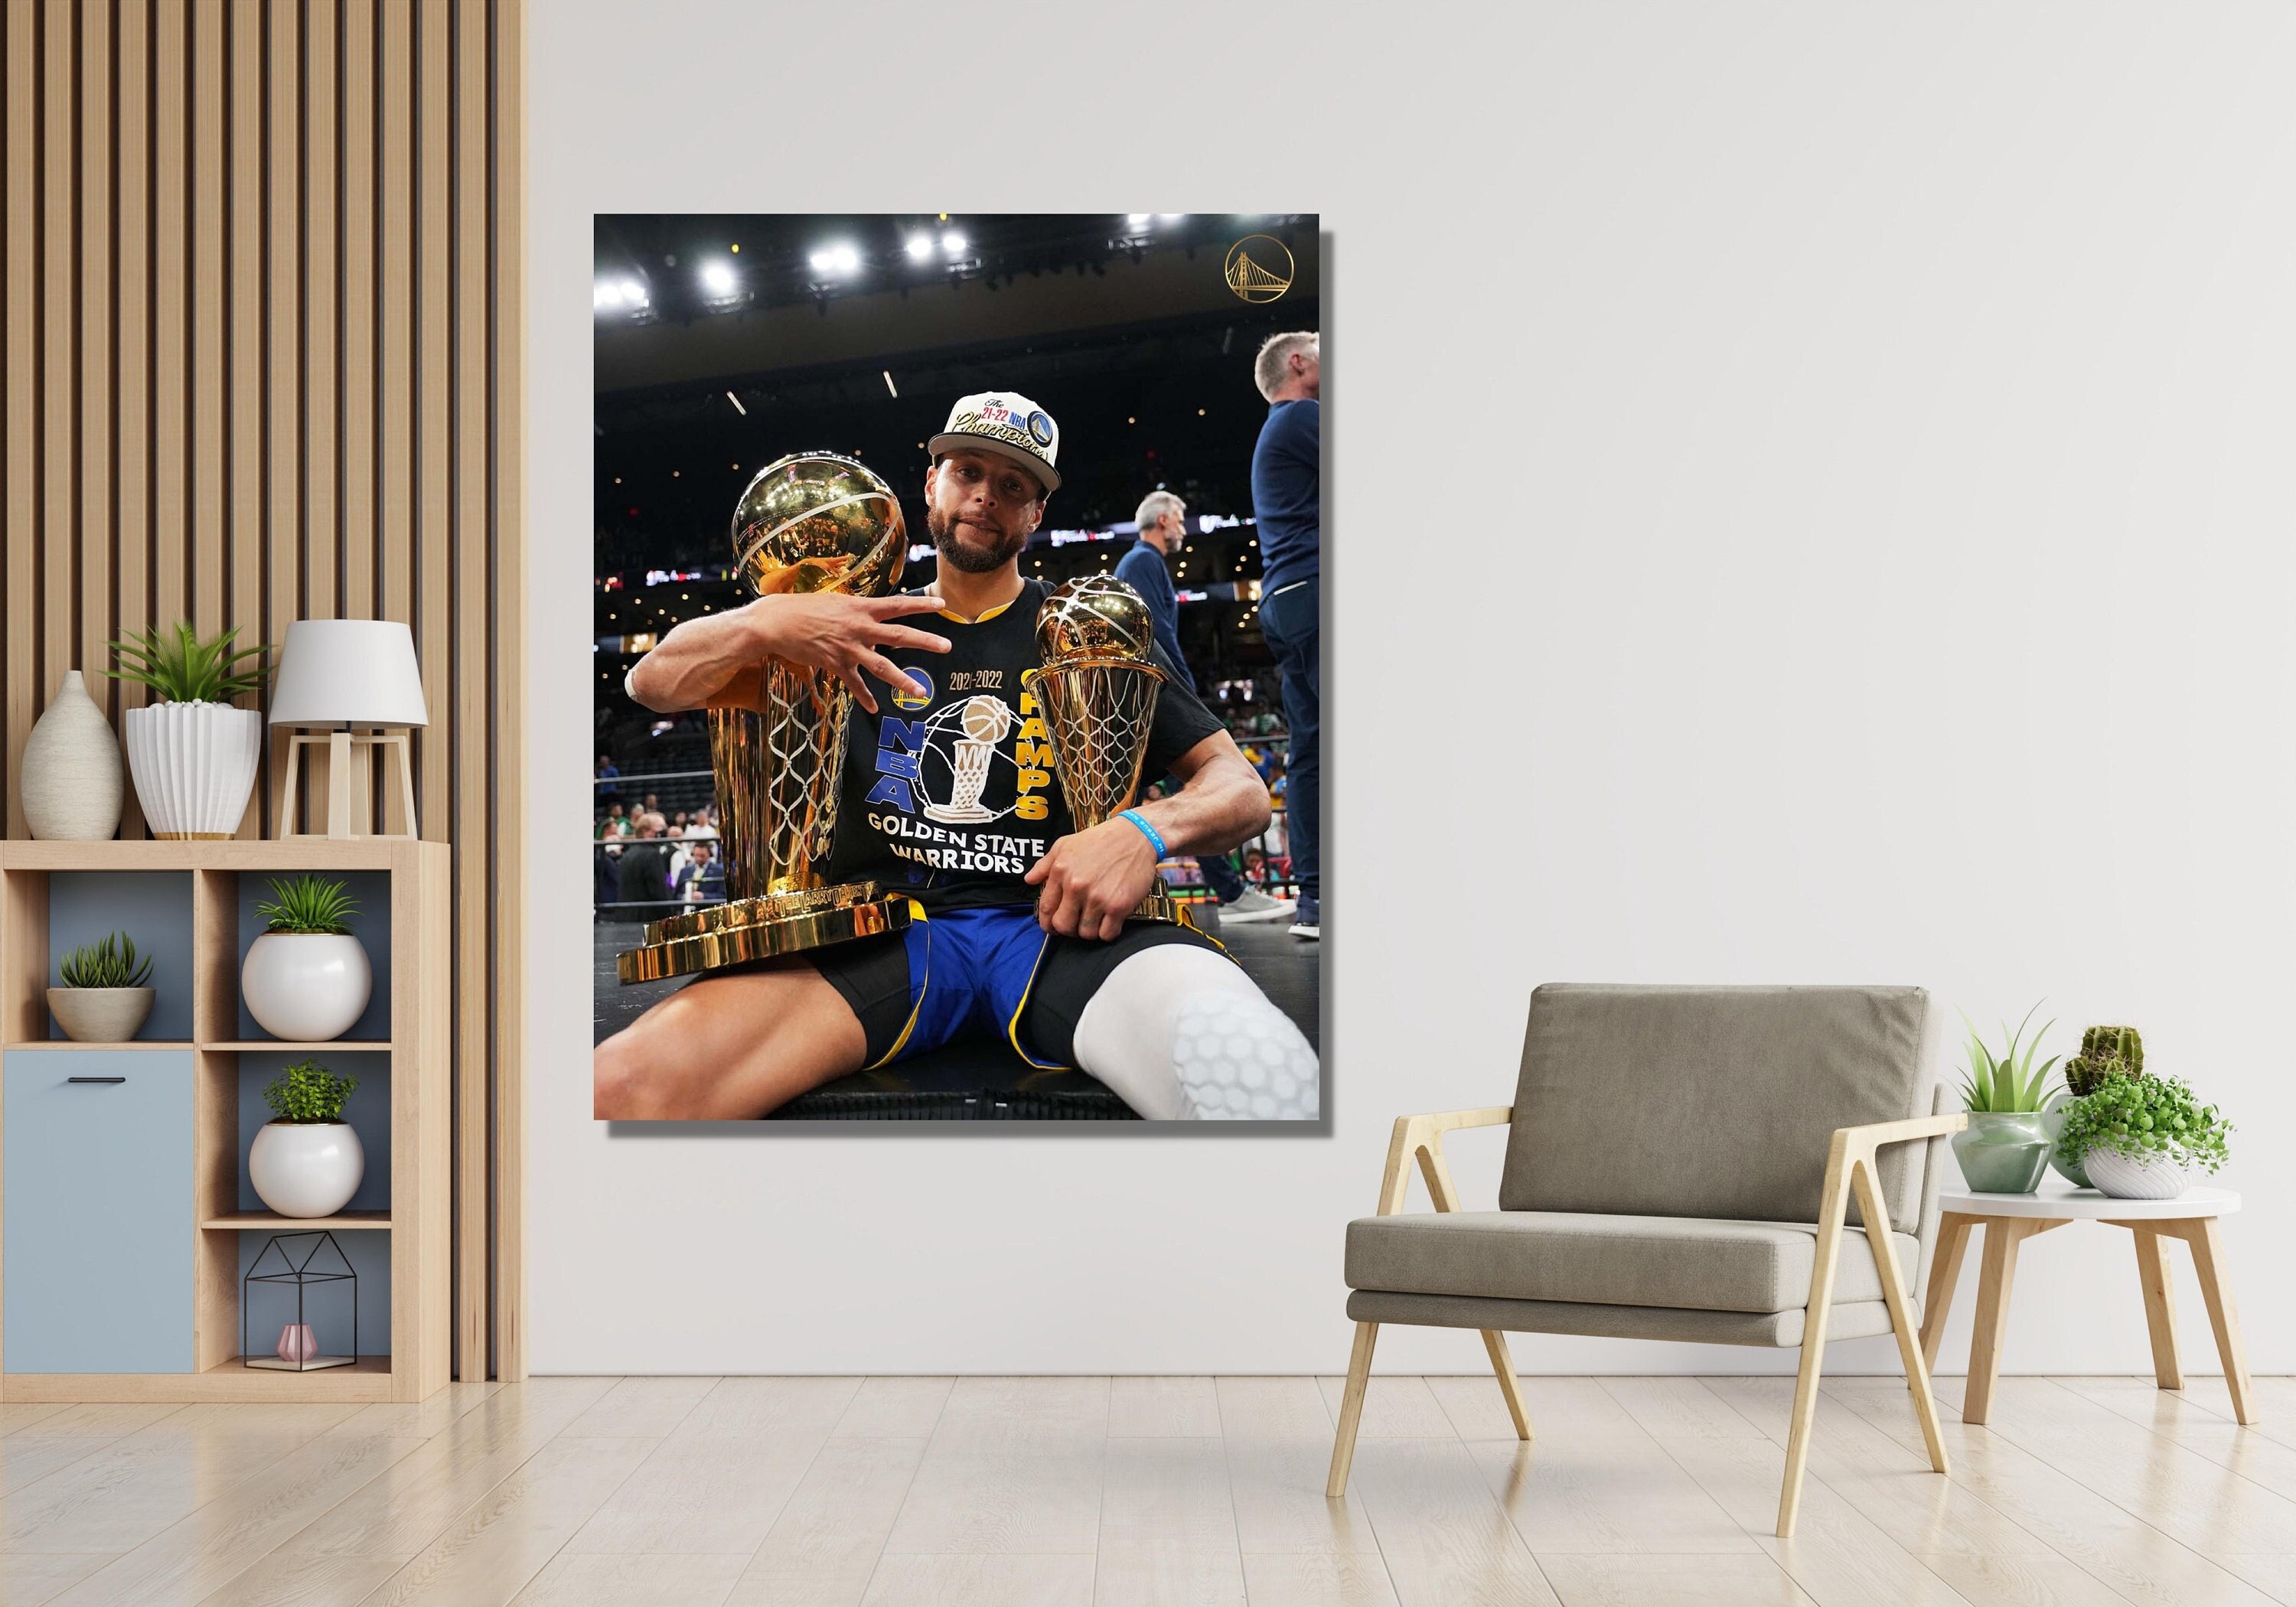  Stephen Curry Poster Canvas Wall Art Basketball Posters Bedroom  Office Wall Decor (20x30inch-No Frame,C): Posters & Prints